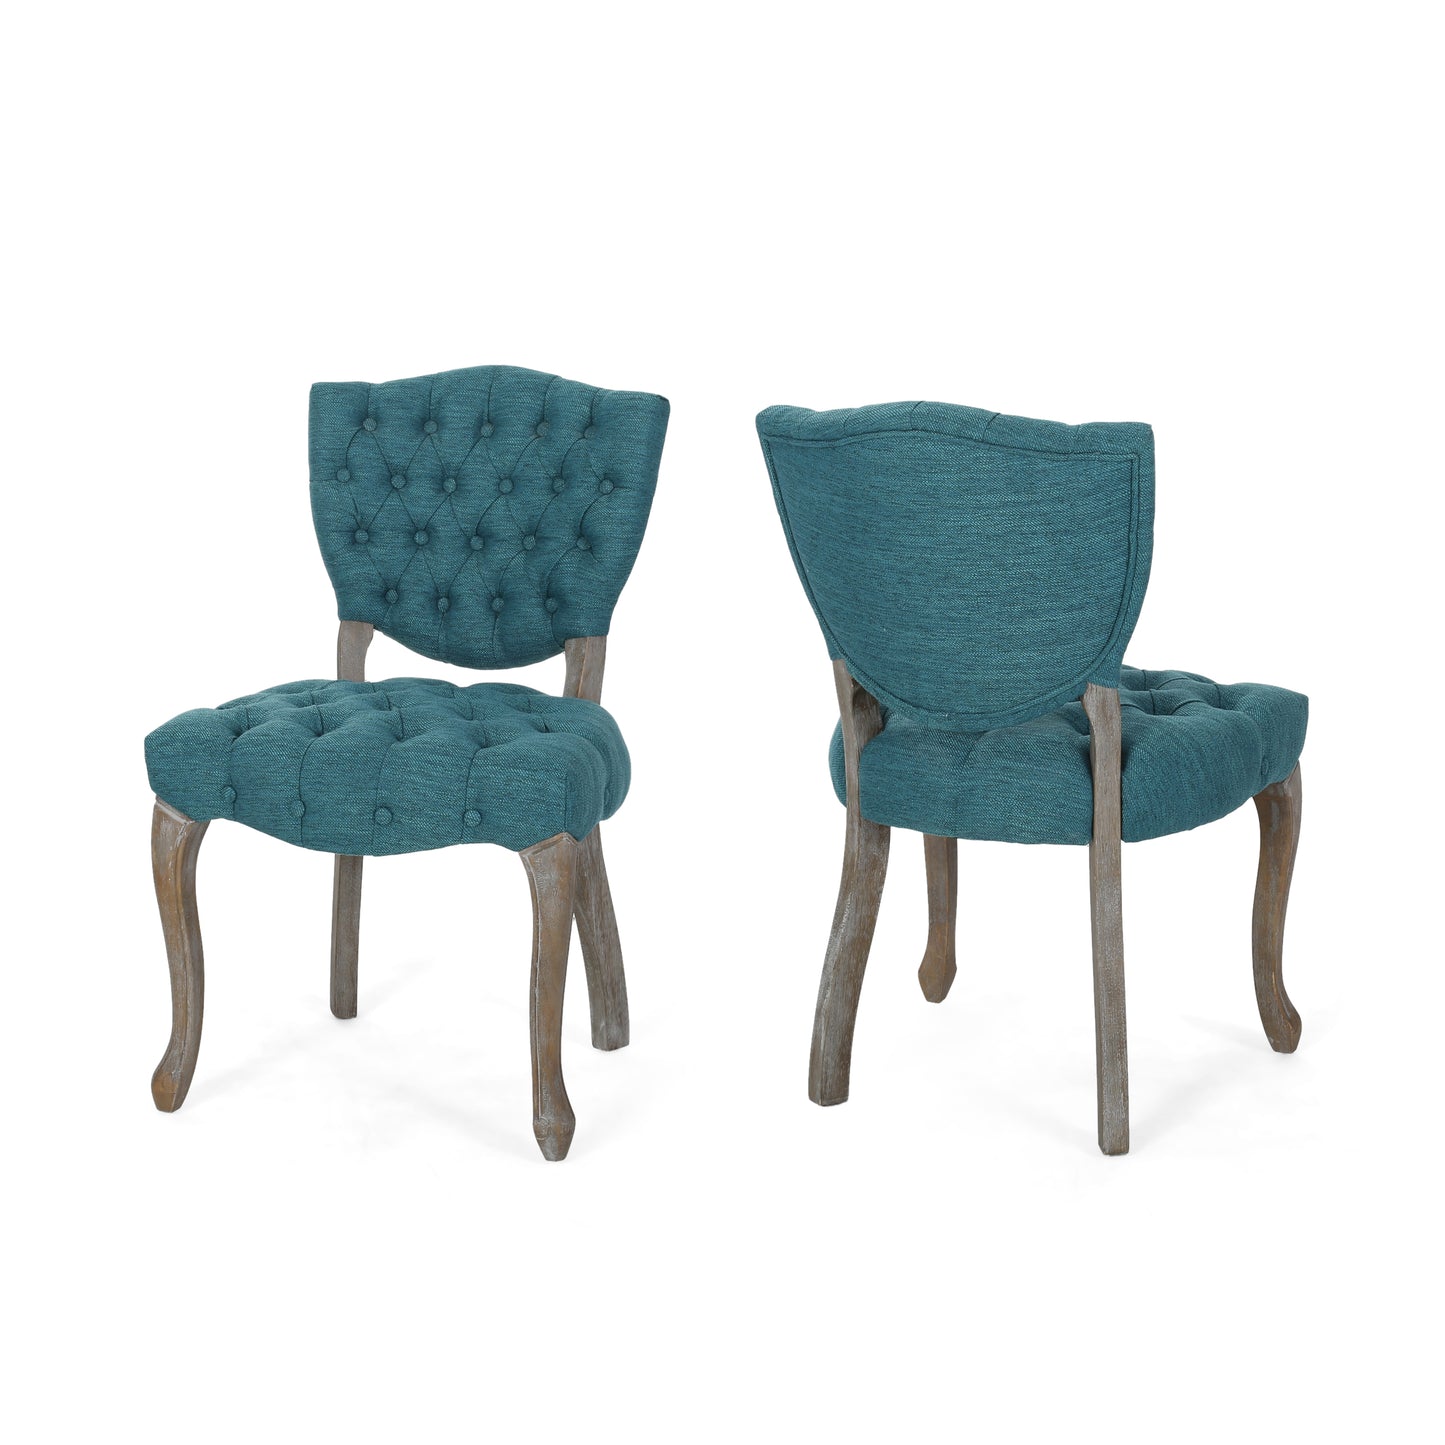 Case Tufted Dining Chair with Cabriole Legs (Set of 2)